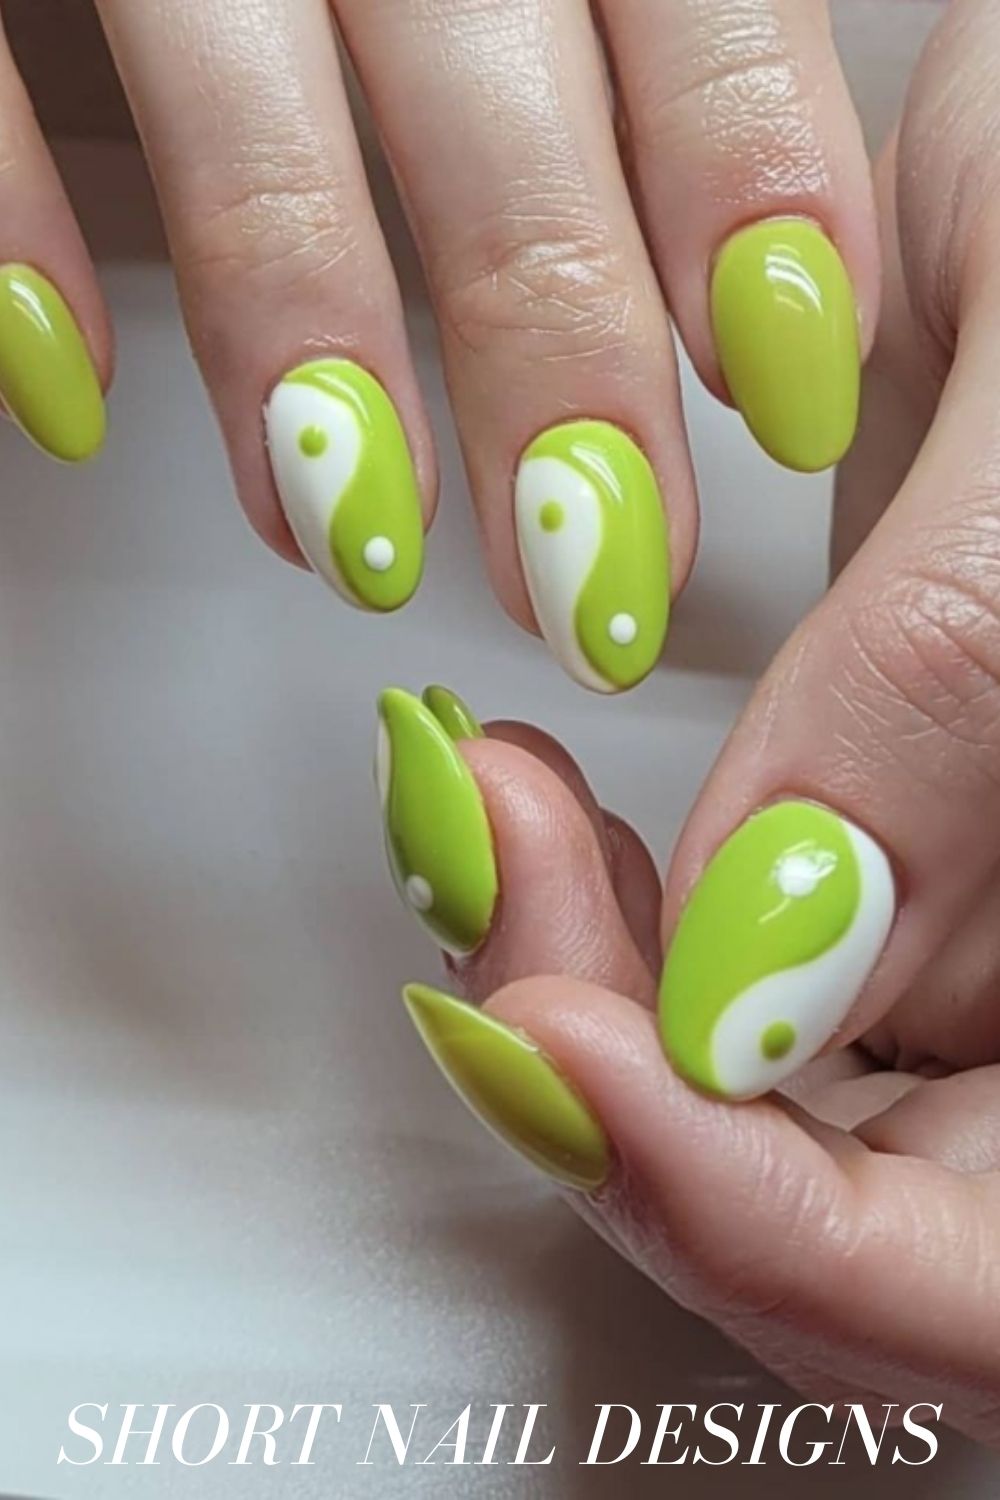 Cute Short Acrylic Nails Designs you'll Want to Try